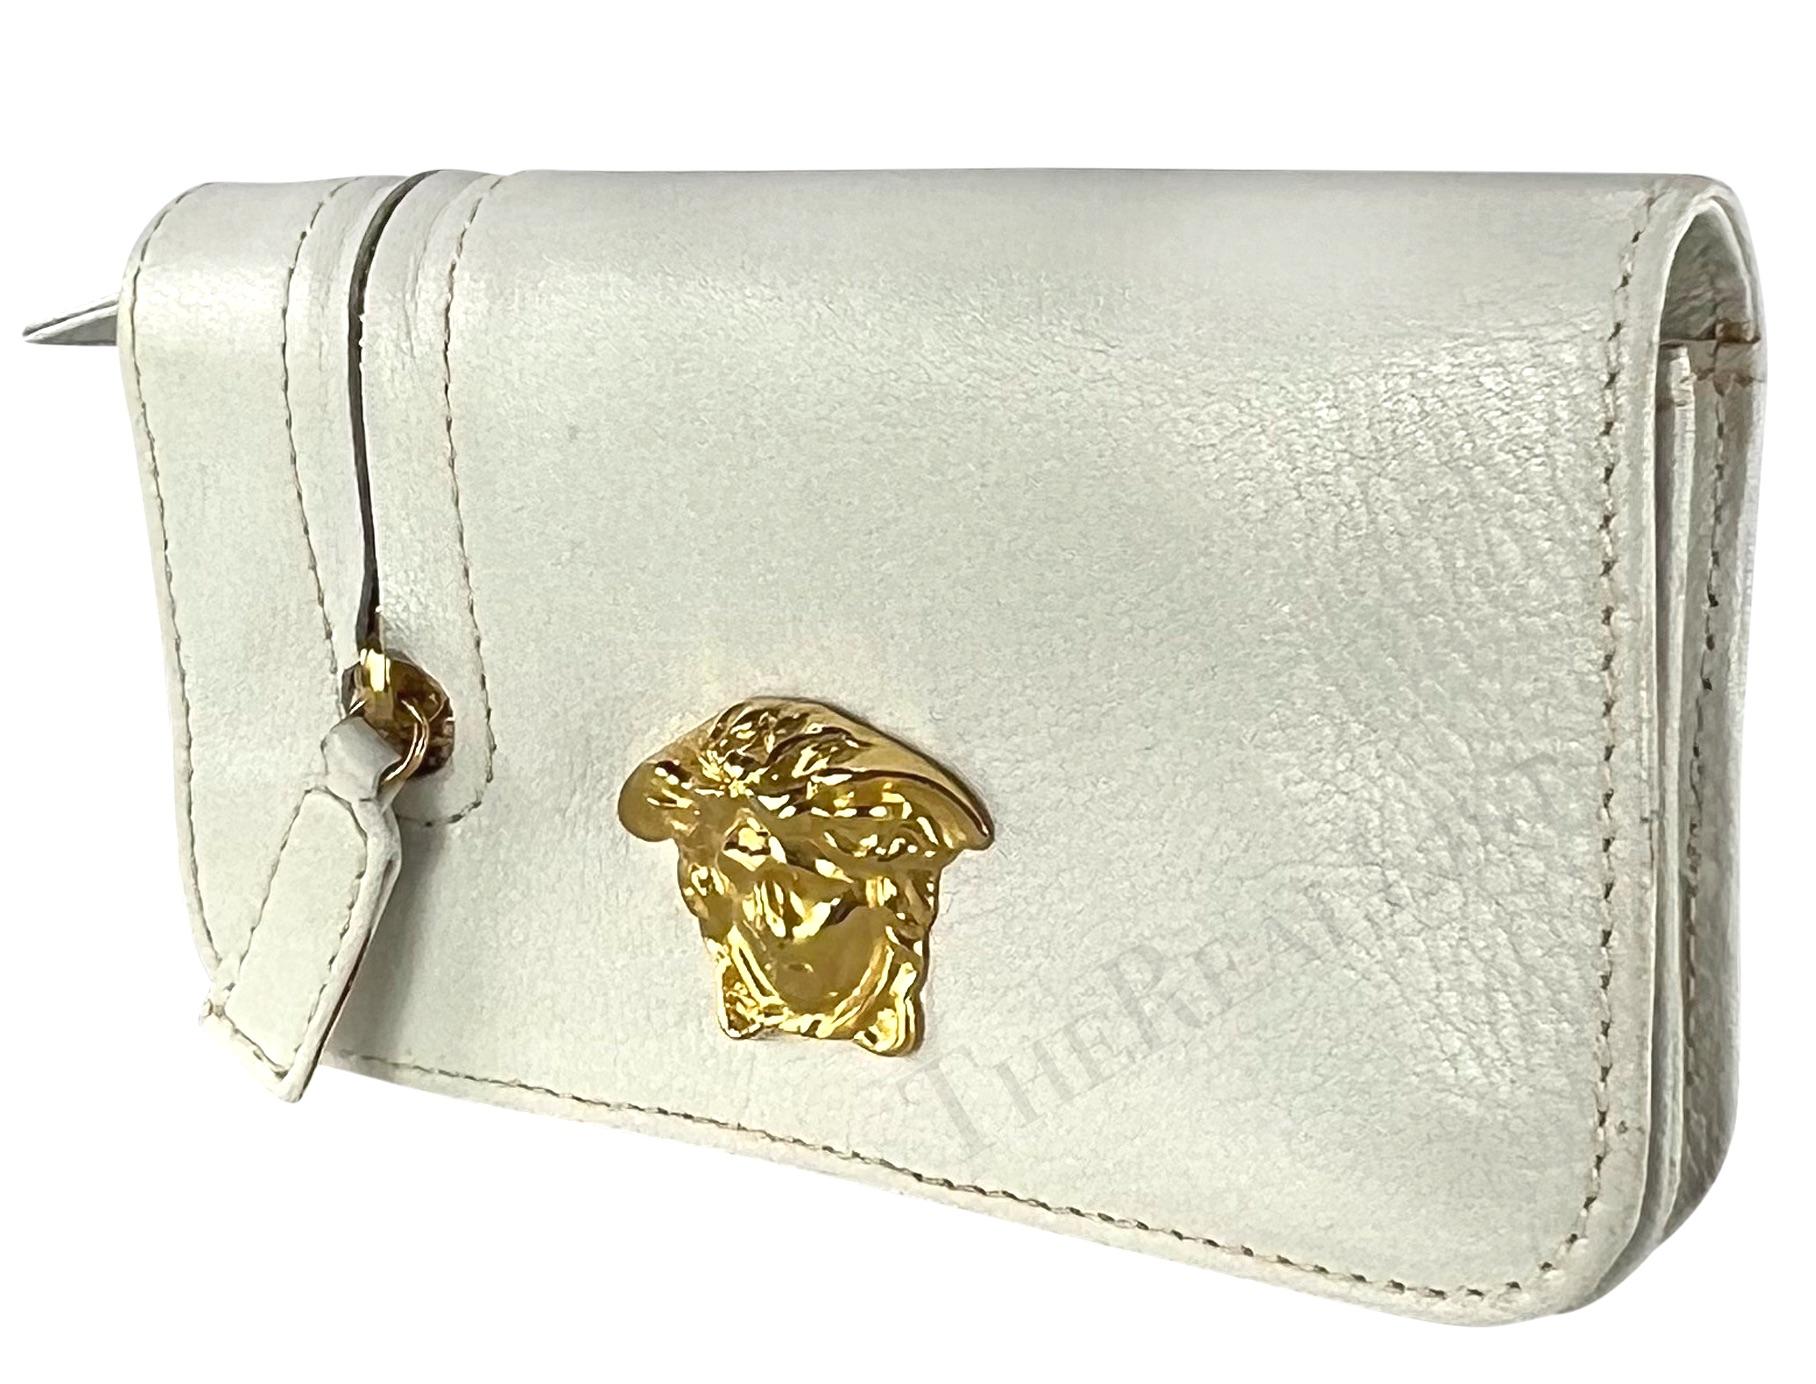 Gianni Versace designed this fabulous white leather Gianni Versace belt bag. From the 1990s, this white leather bag/wallet features a large gold-tone Medusa accent at the front, a zipper pocket at the exterior, a flap closure and is made complete